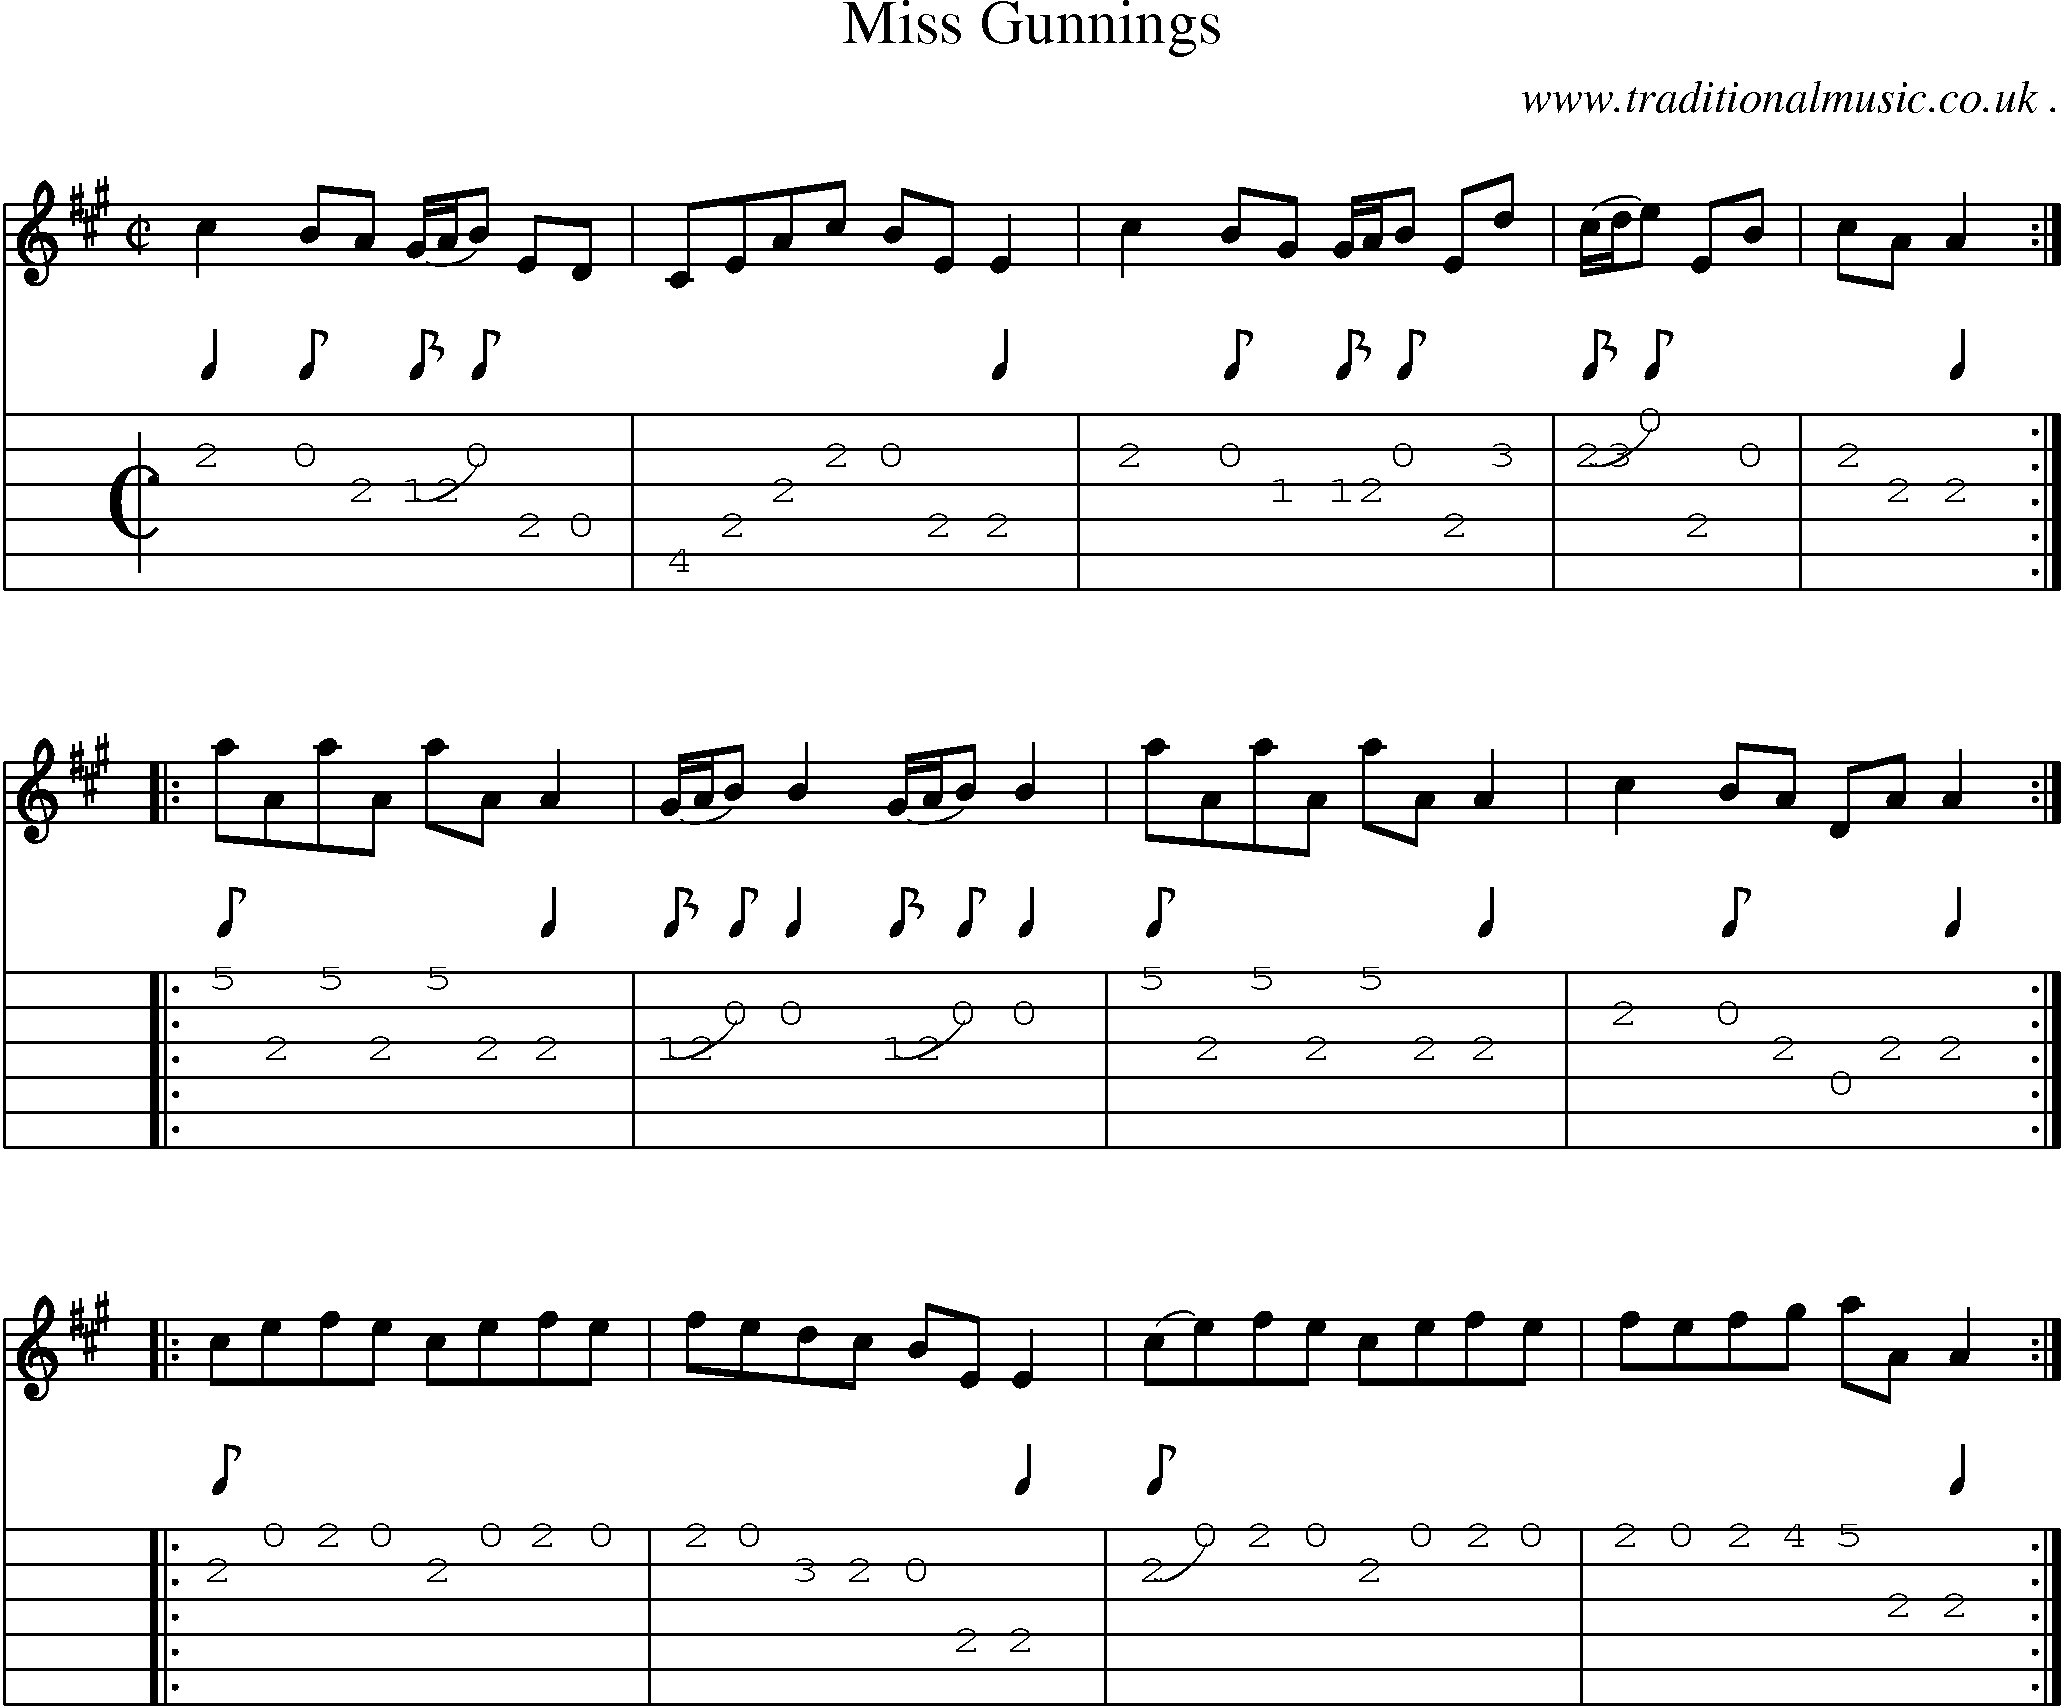 Sheet-music  score, Chords and Guitar Tabs for Miss Gunnings